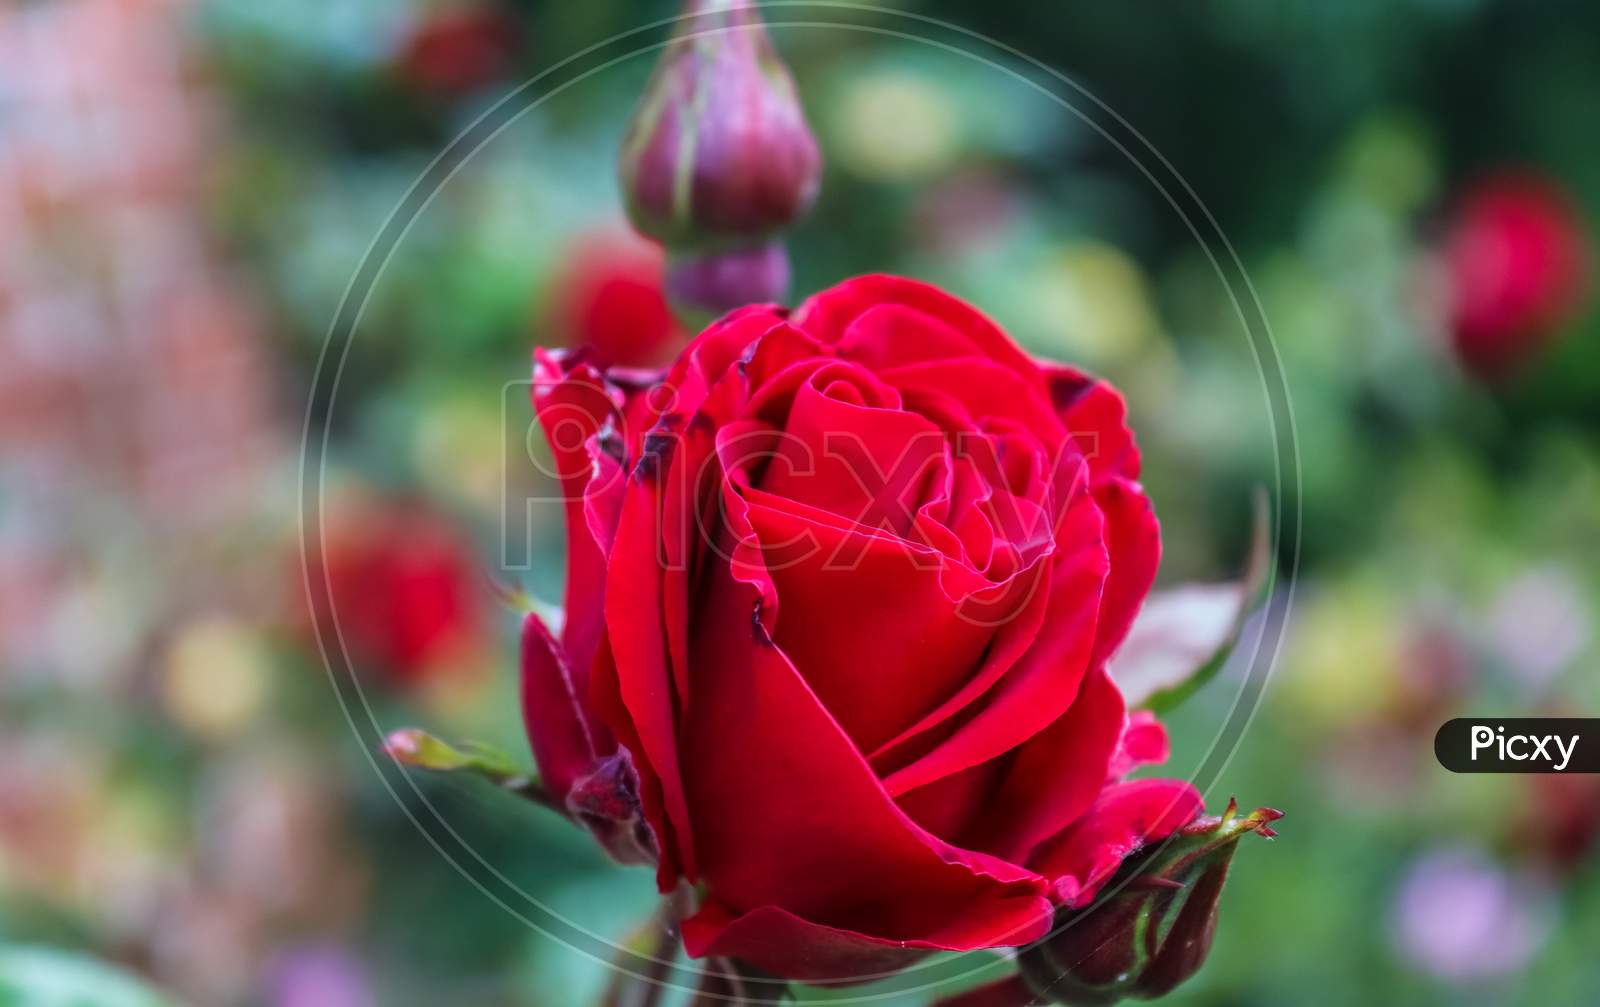 Top View Of Yellow And Orange Rose Flower In A Roses Garden With A Soft Focus Background